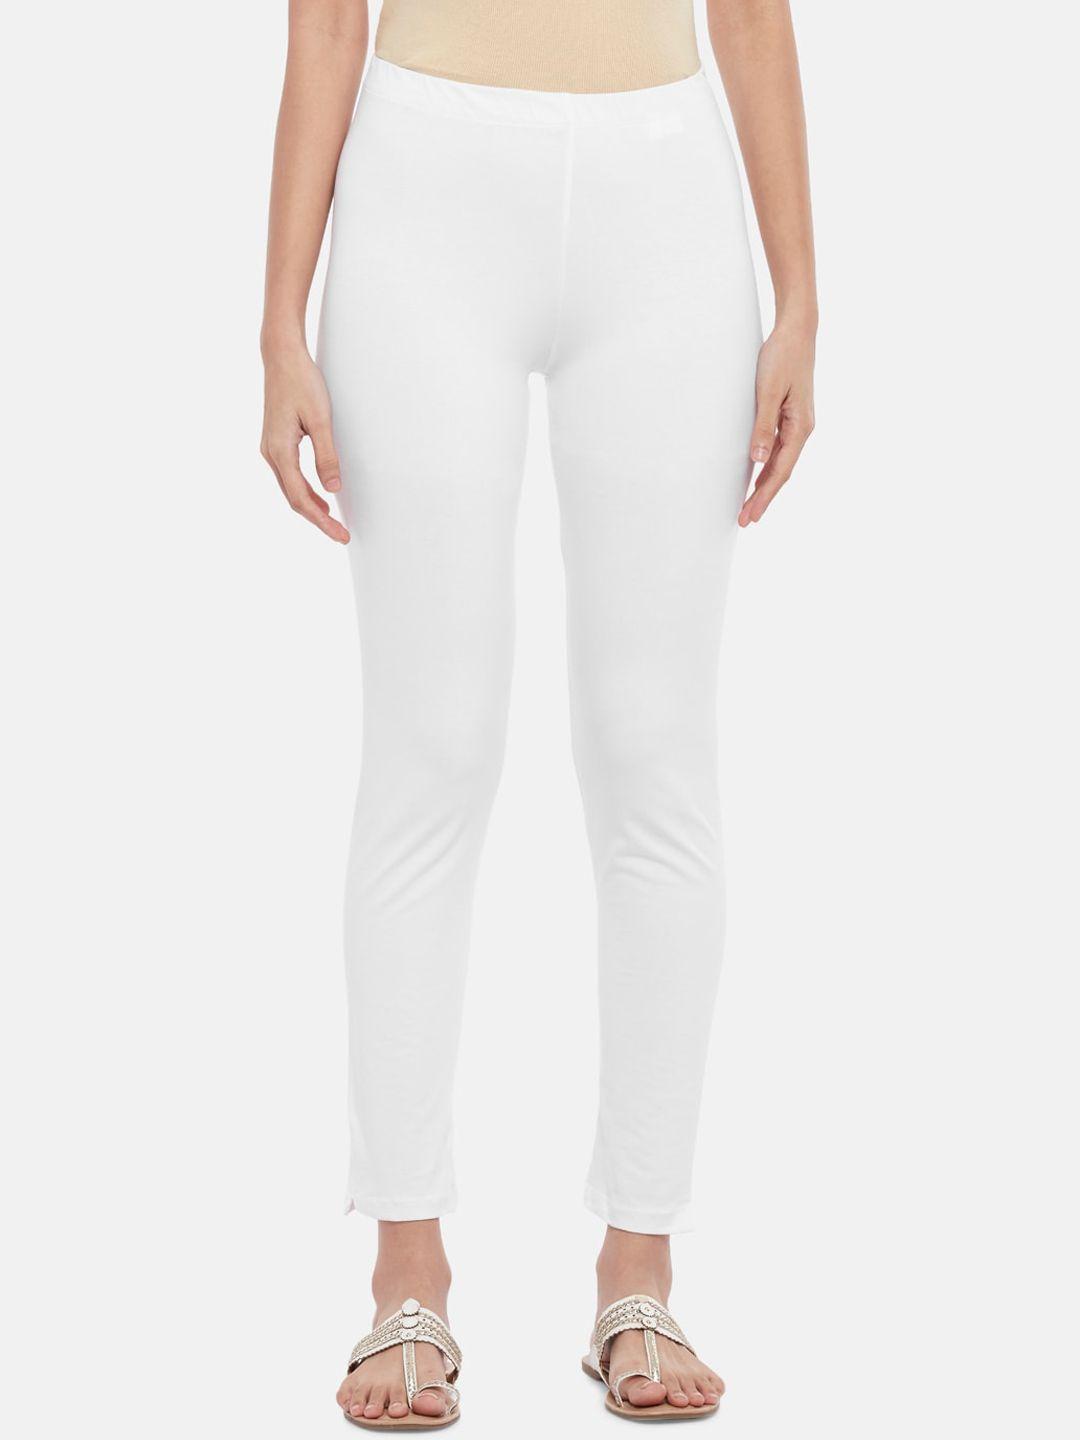 rangmanch by pantaloons women white solid trousers